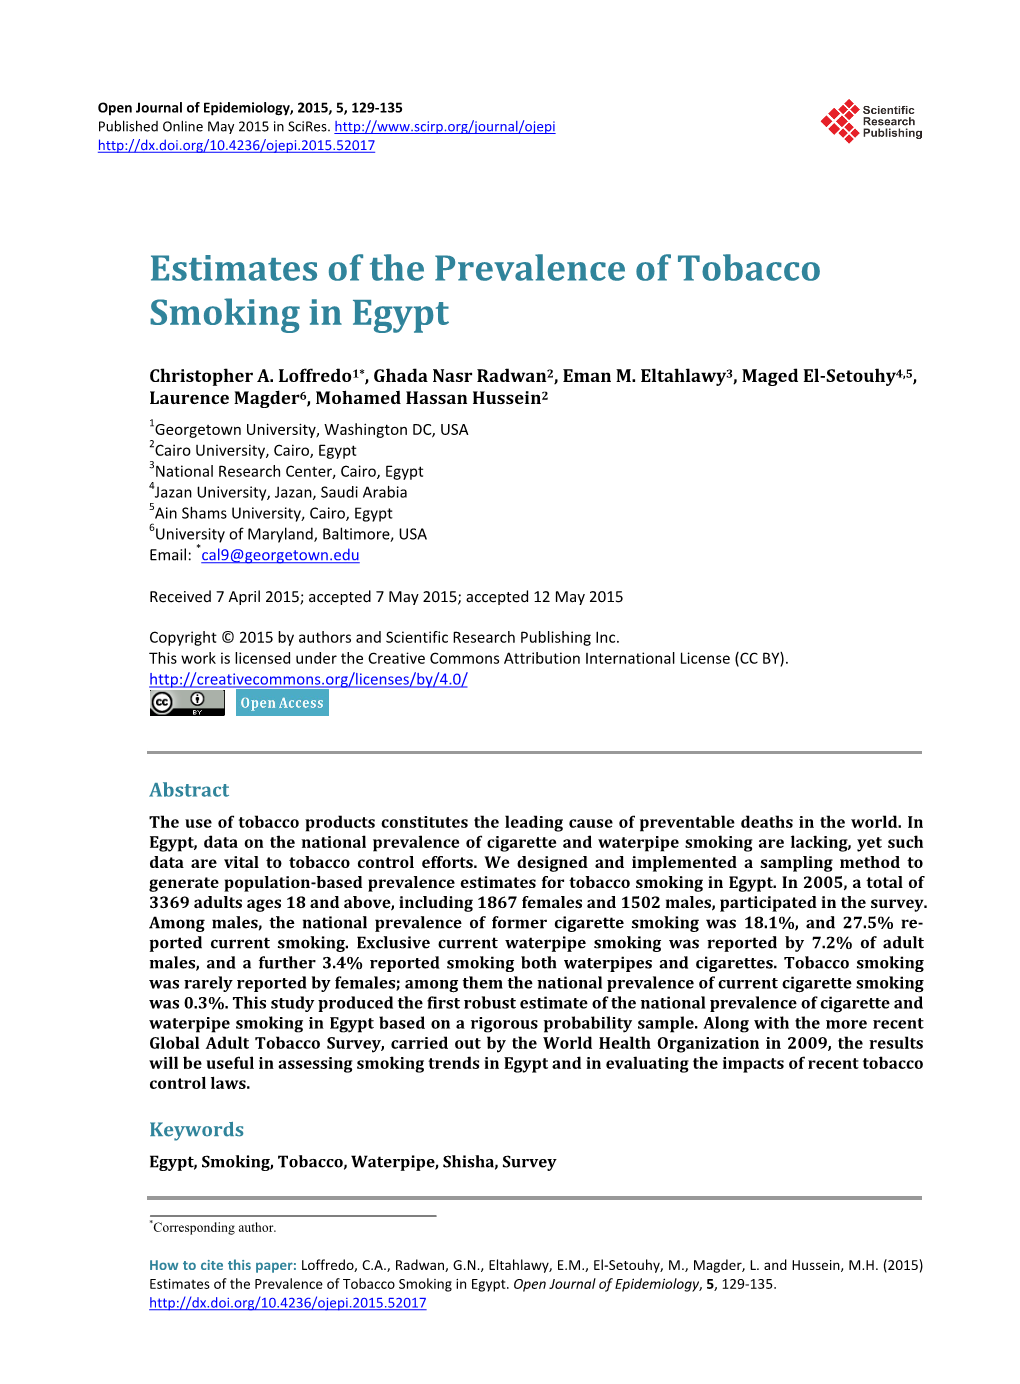 Estimates of the Prevalence of Tobacco Smoking in Egypt